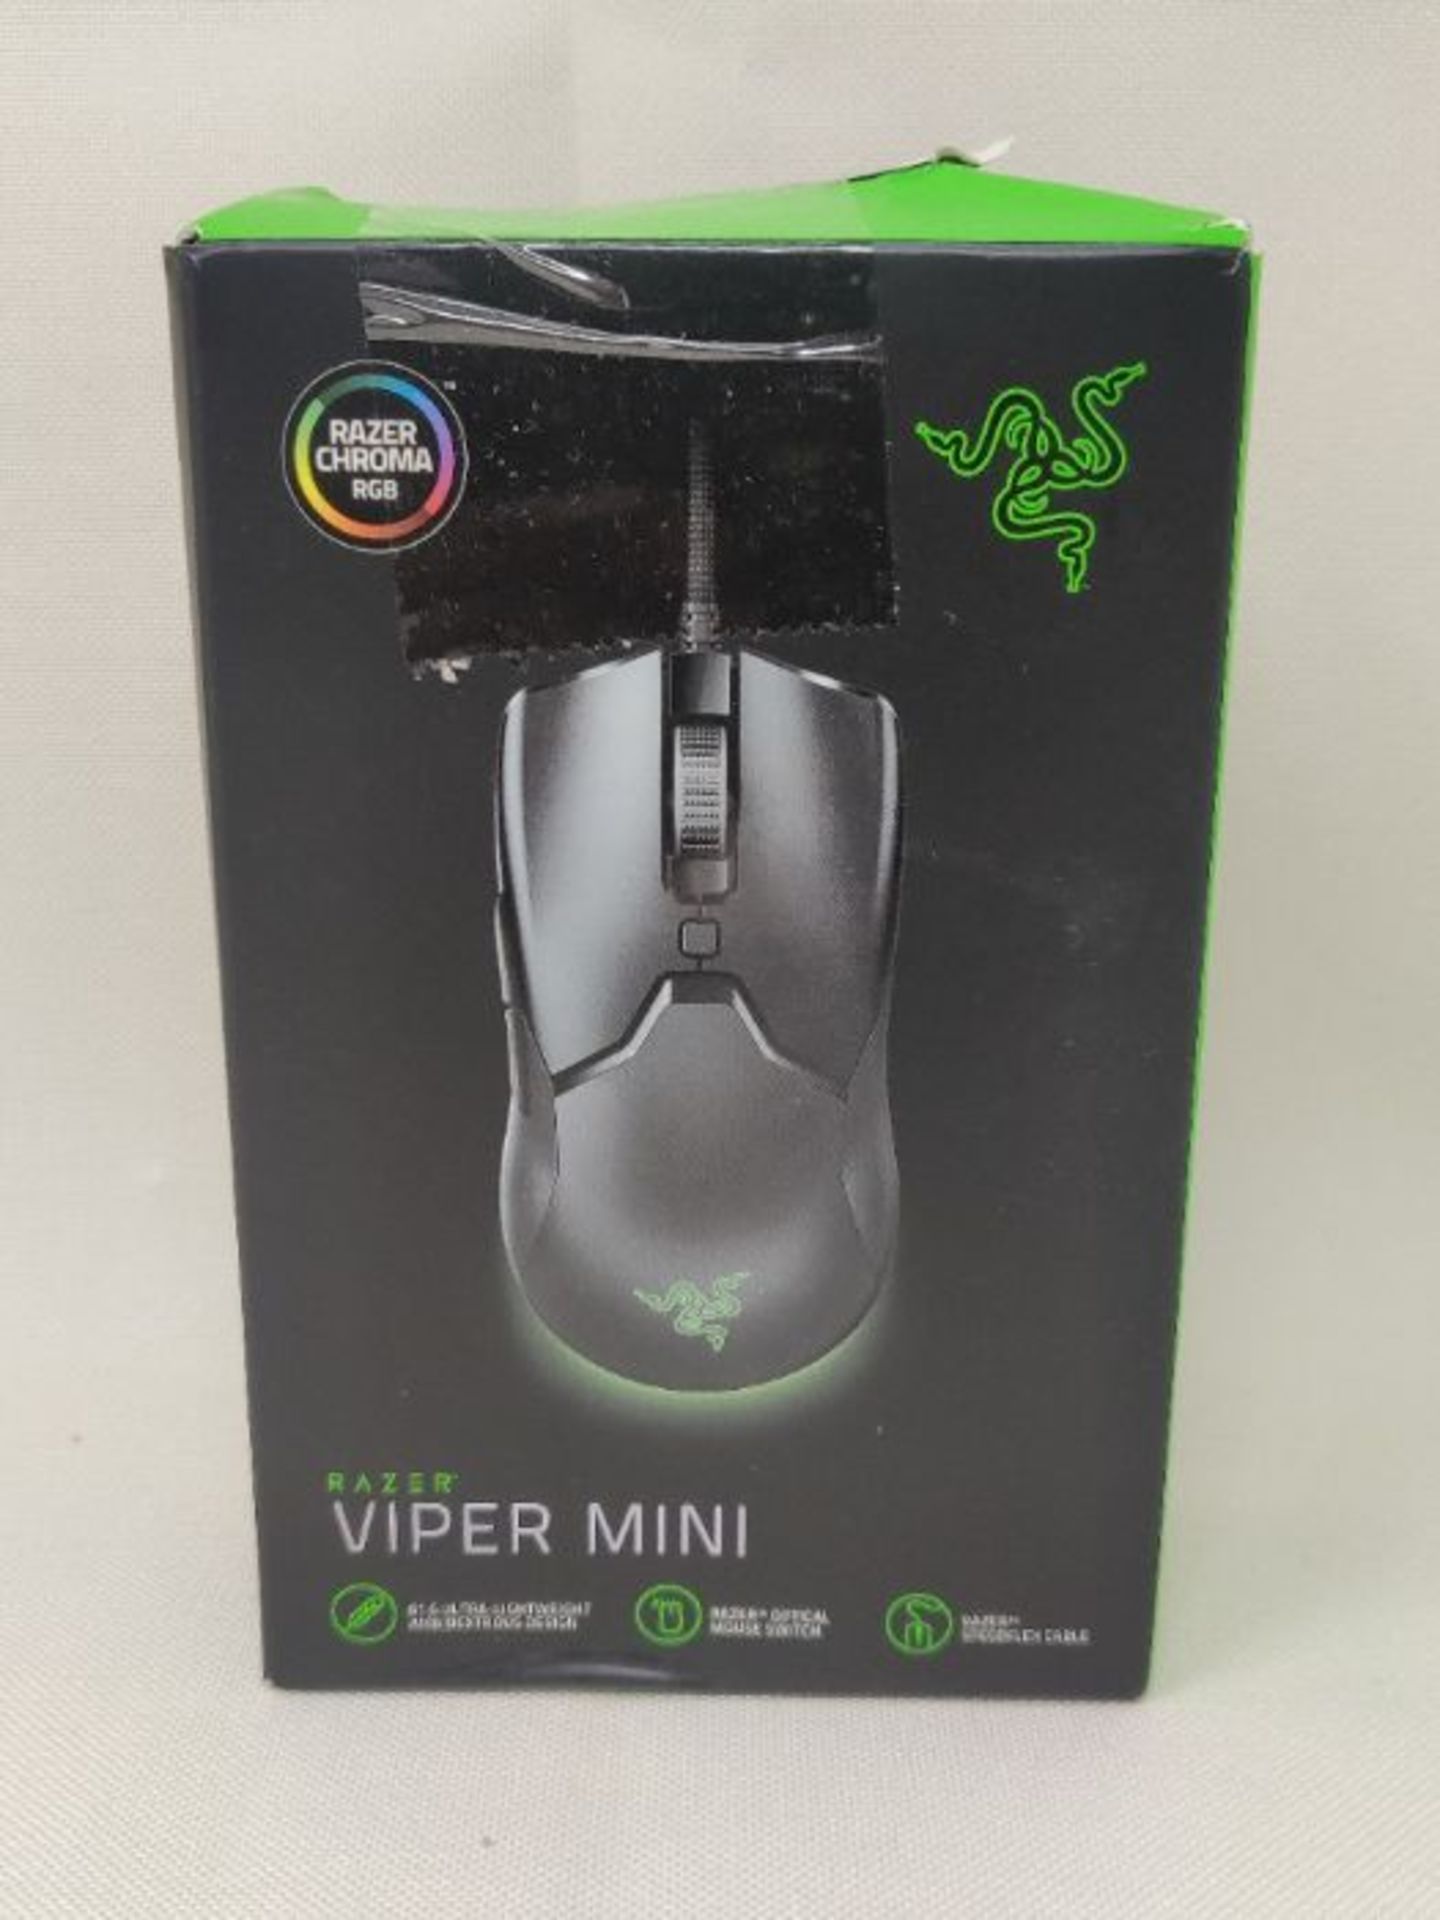 Razer Viper Mini - Wired Gaming Mouse weighing only 61g for PC / Mac (Ultralight, Ambi - Image 2 of 3